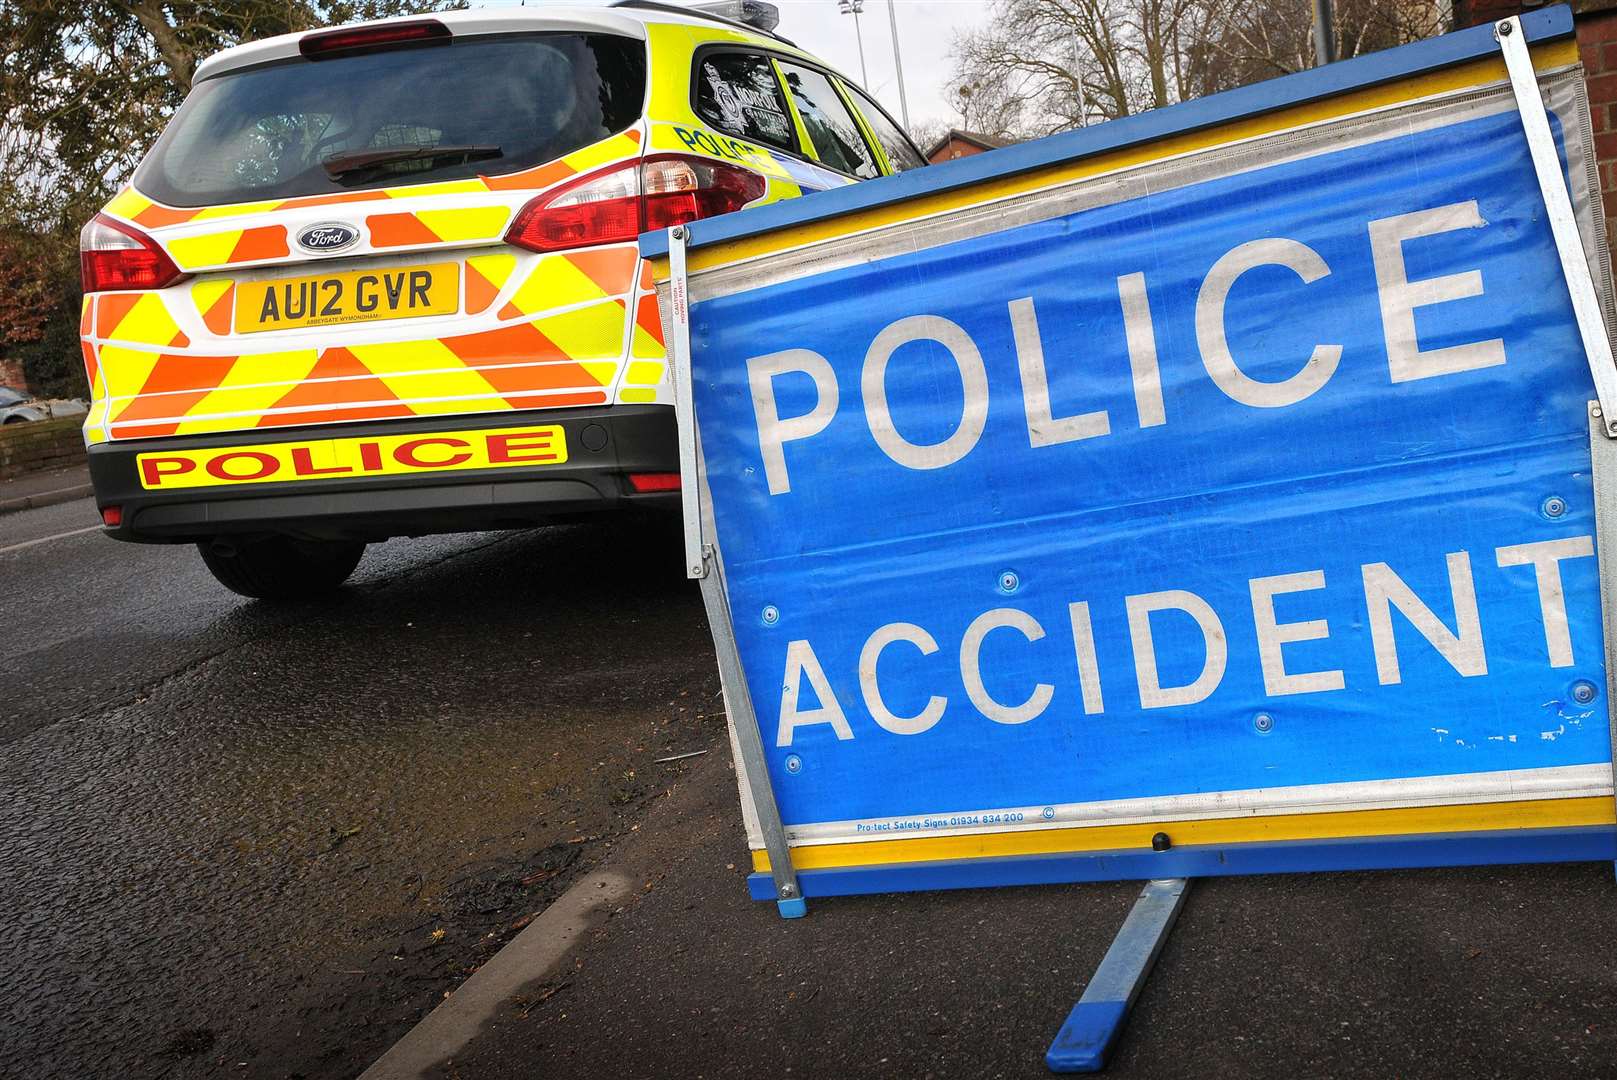 Emergency services were called to an accident on a village road on Saturday night